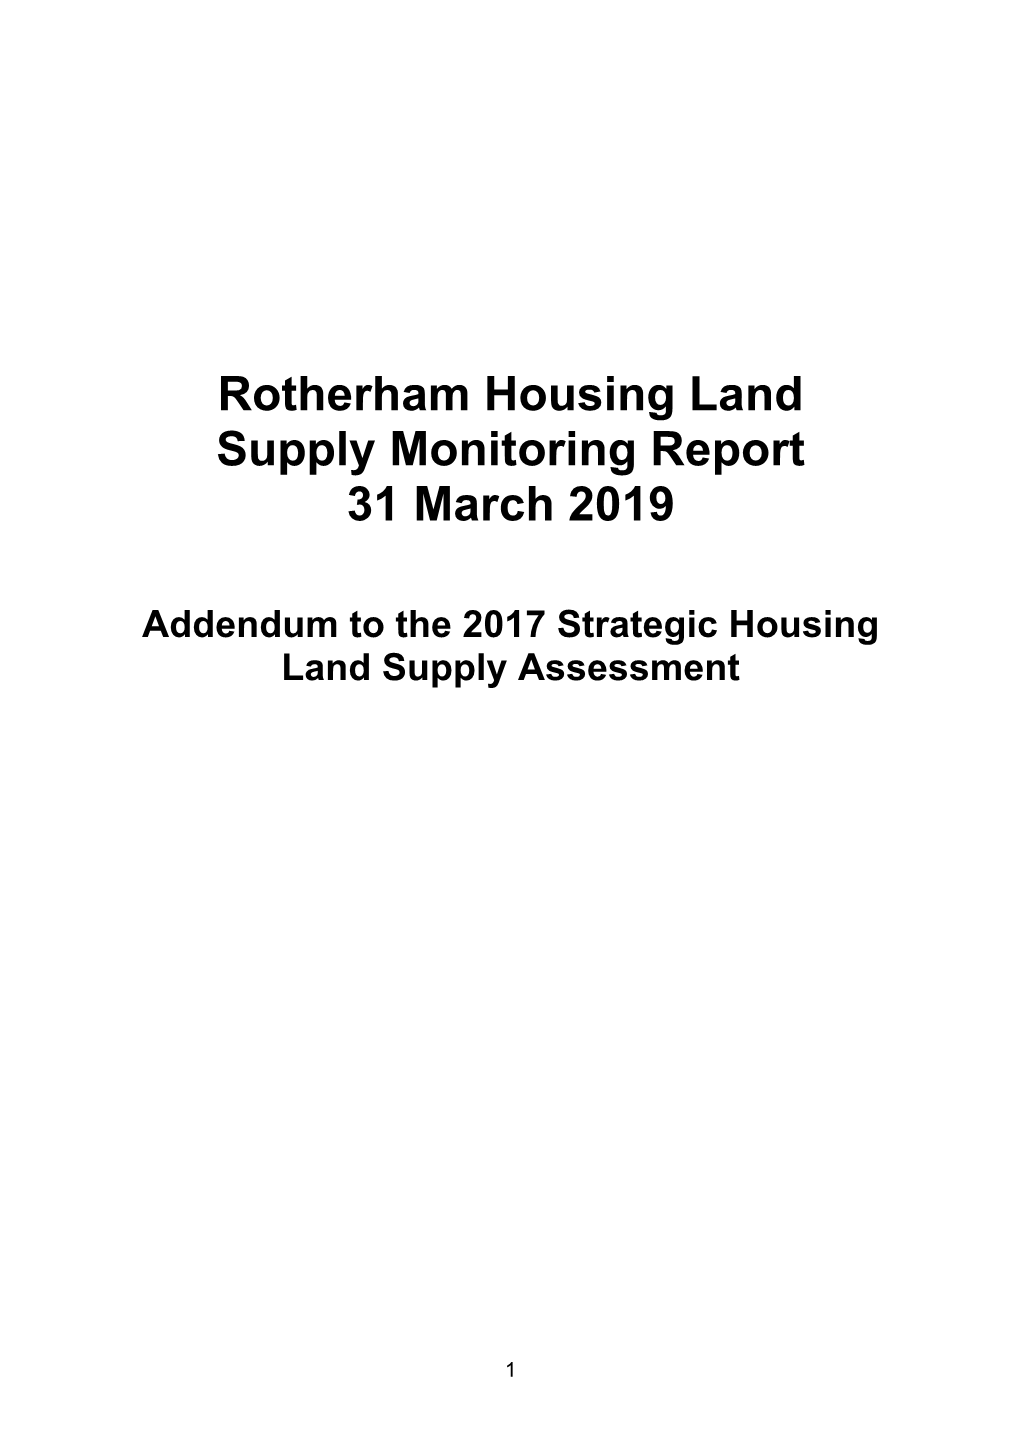 Rotherham Housing Land Supply Monitoring Report 31 March 2019